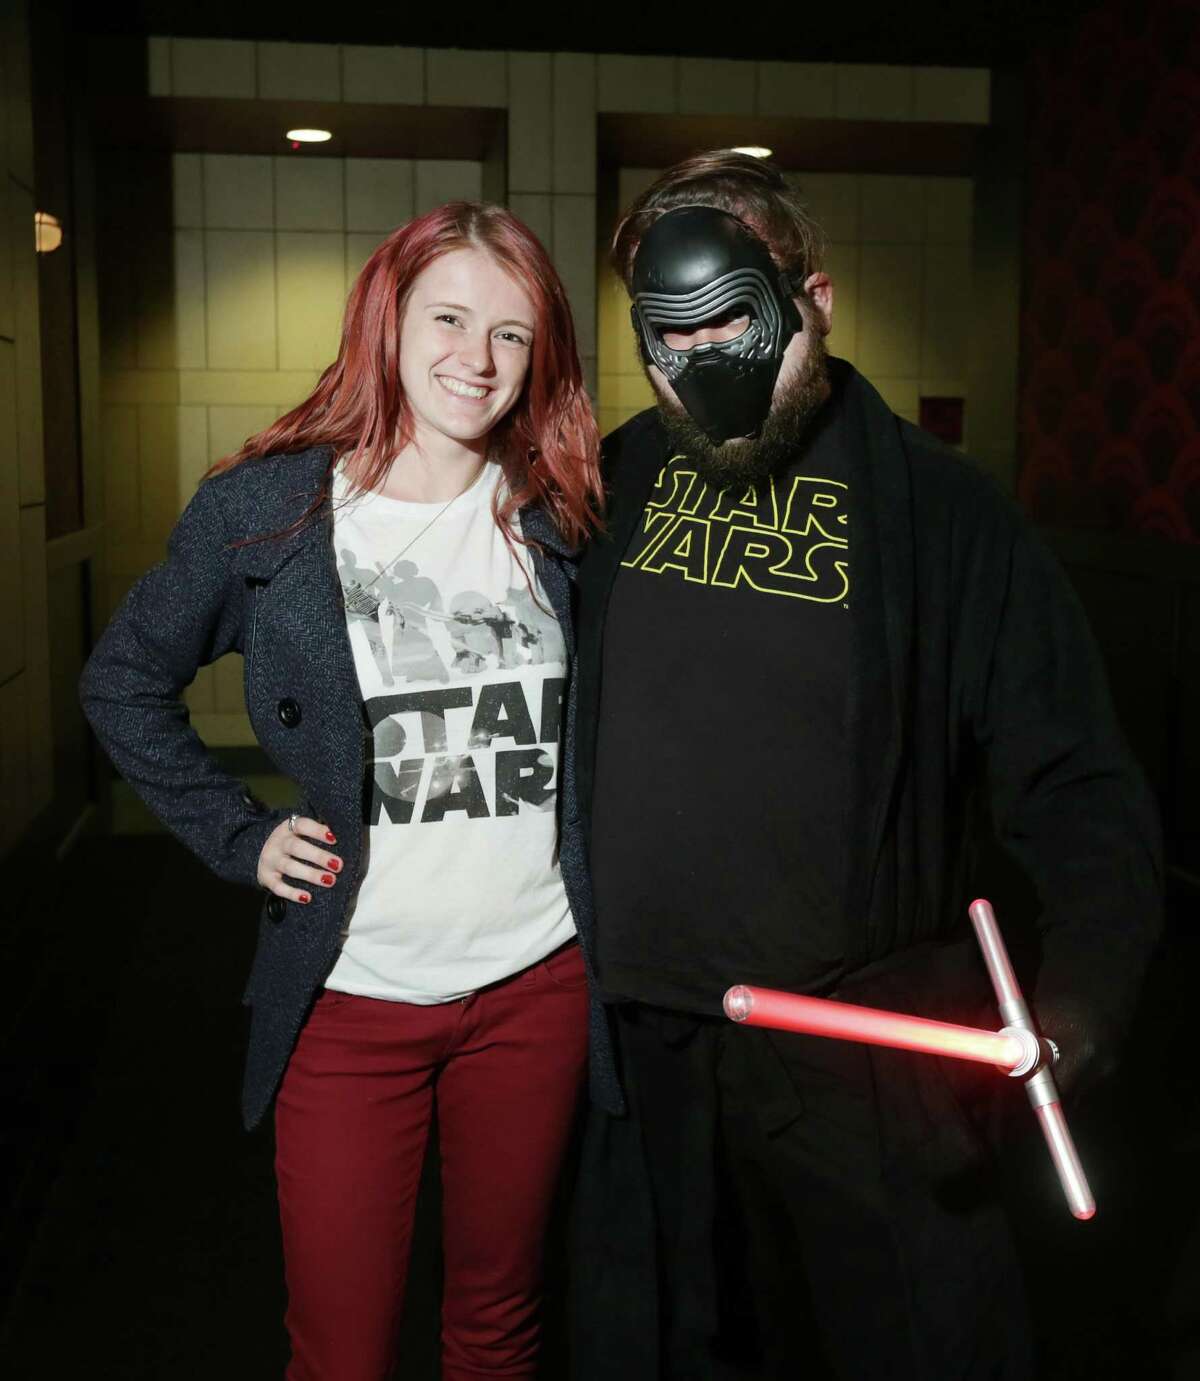 Fans at the opening of the film "Star Wars: The Force Awakens" on Dec. 17 at the Alamo Drafthouse in Houston.